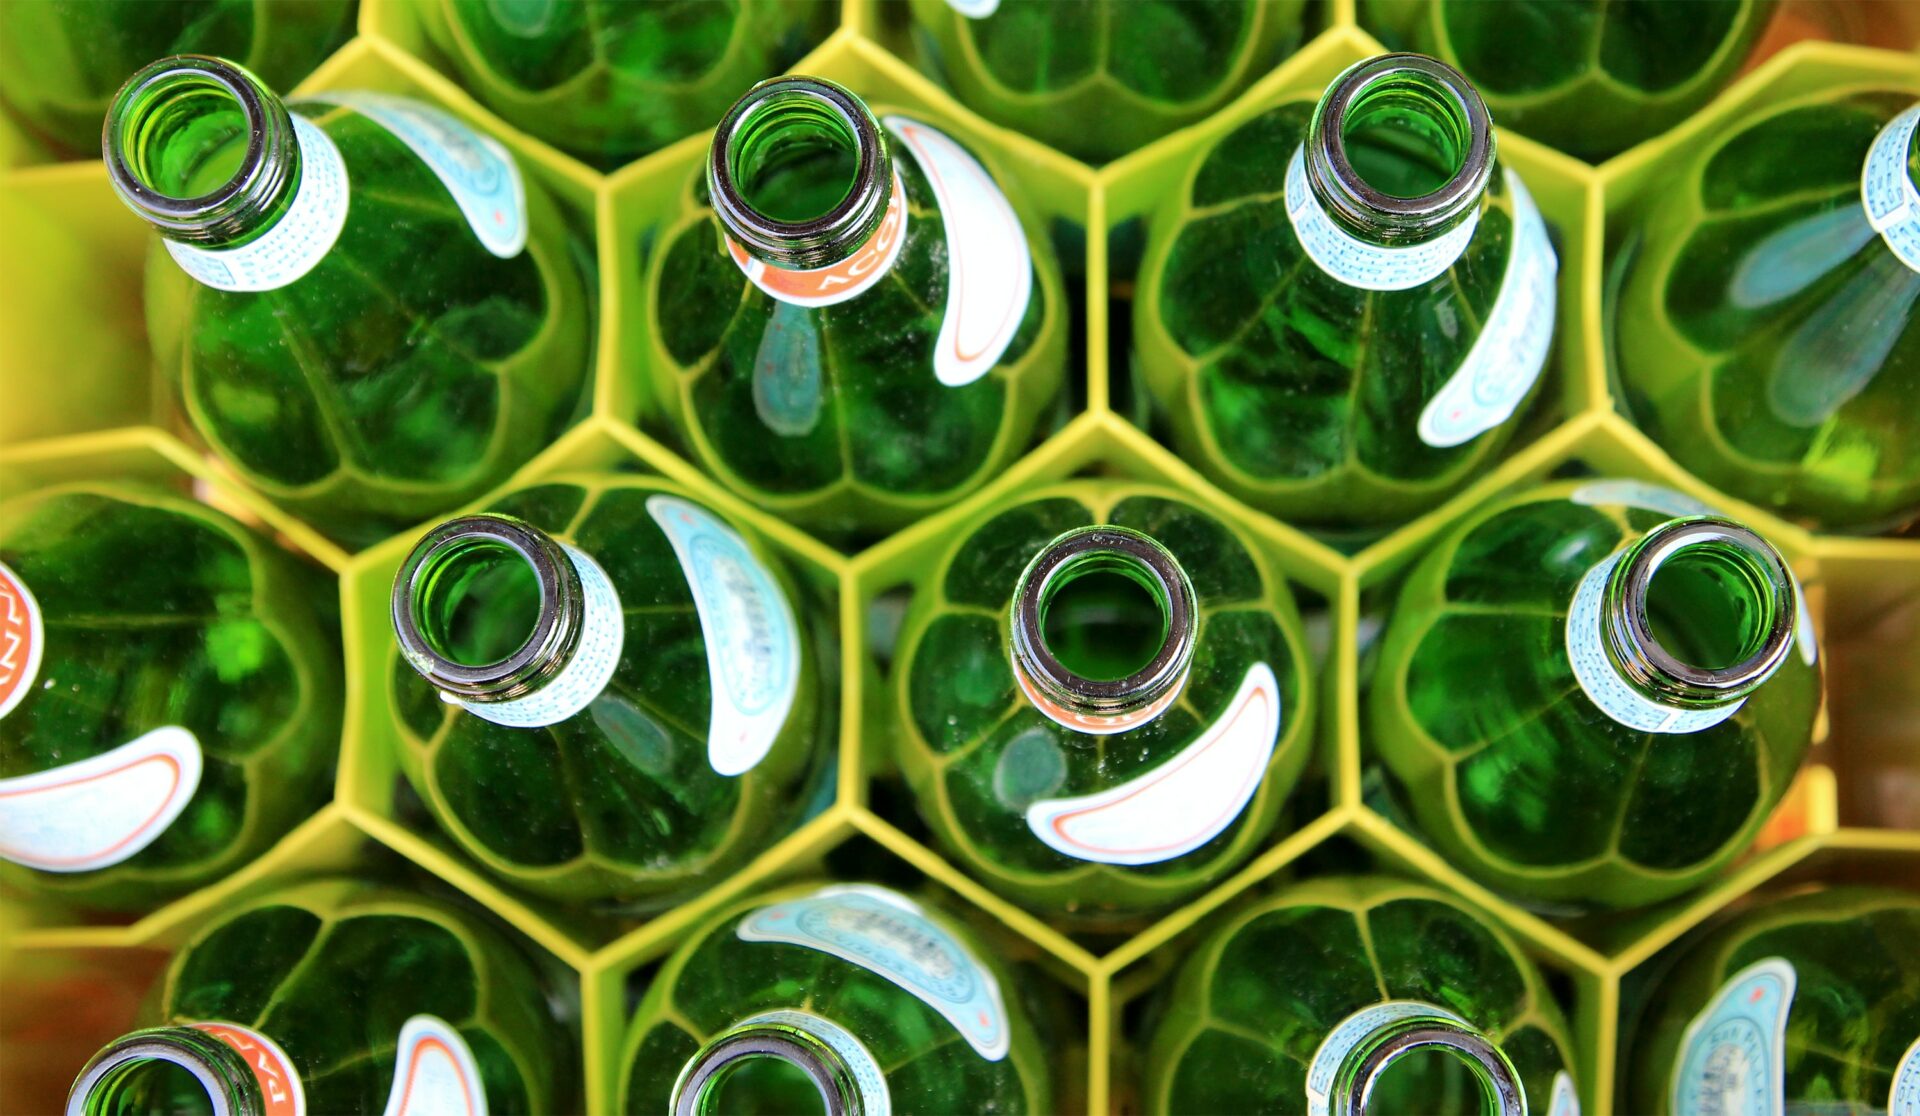 Aerial view of four lines of green glass bottles standing in organized holders.